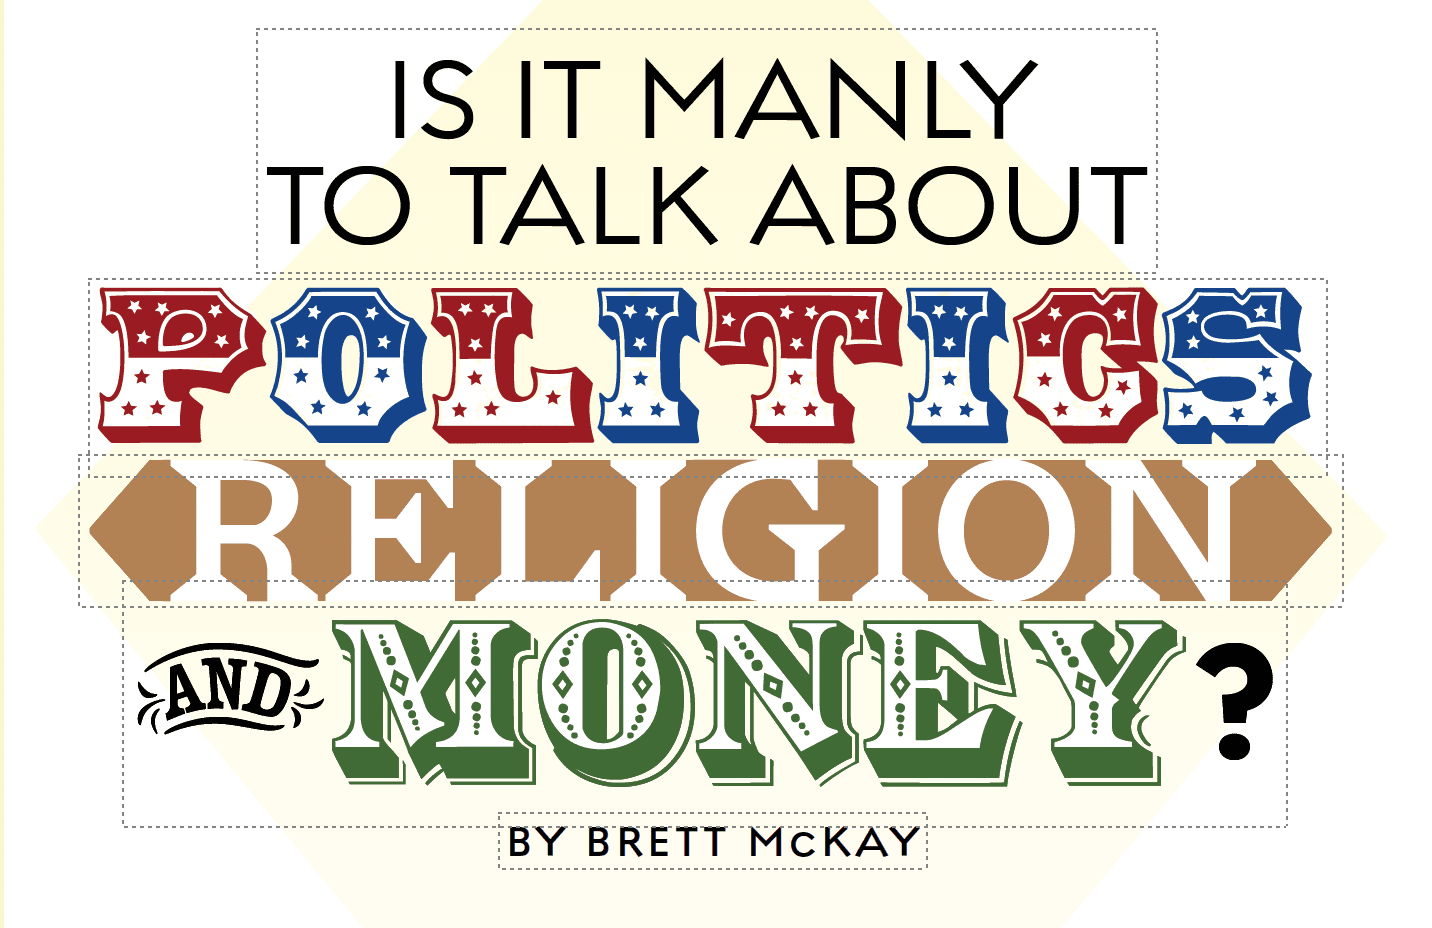 Politics, religion, and money: Brett McKay, expert on “manliness,” explains how to discuss these tricky topics.